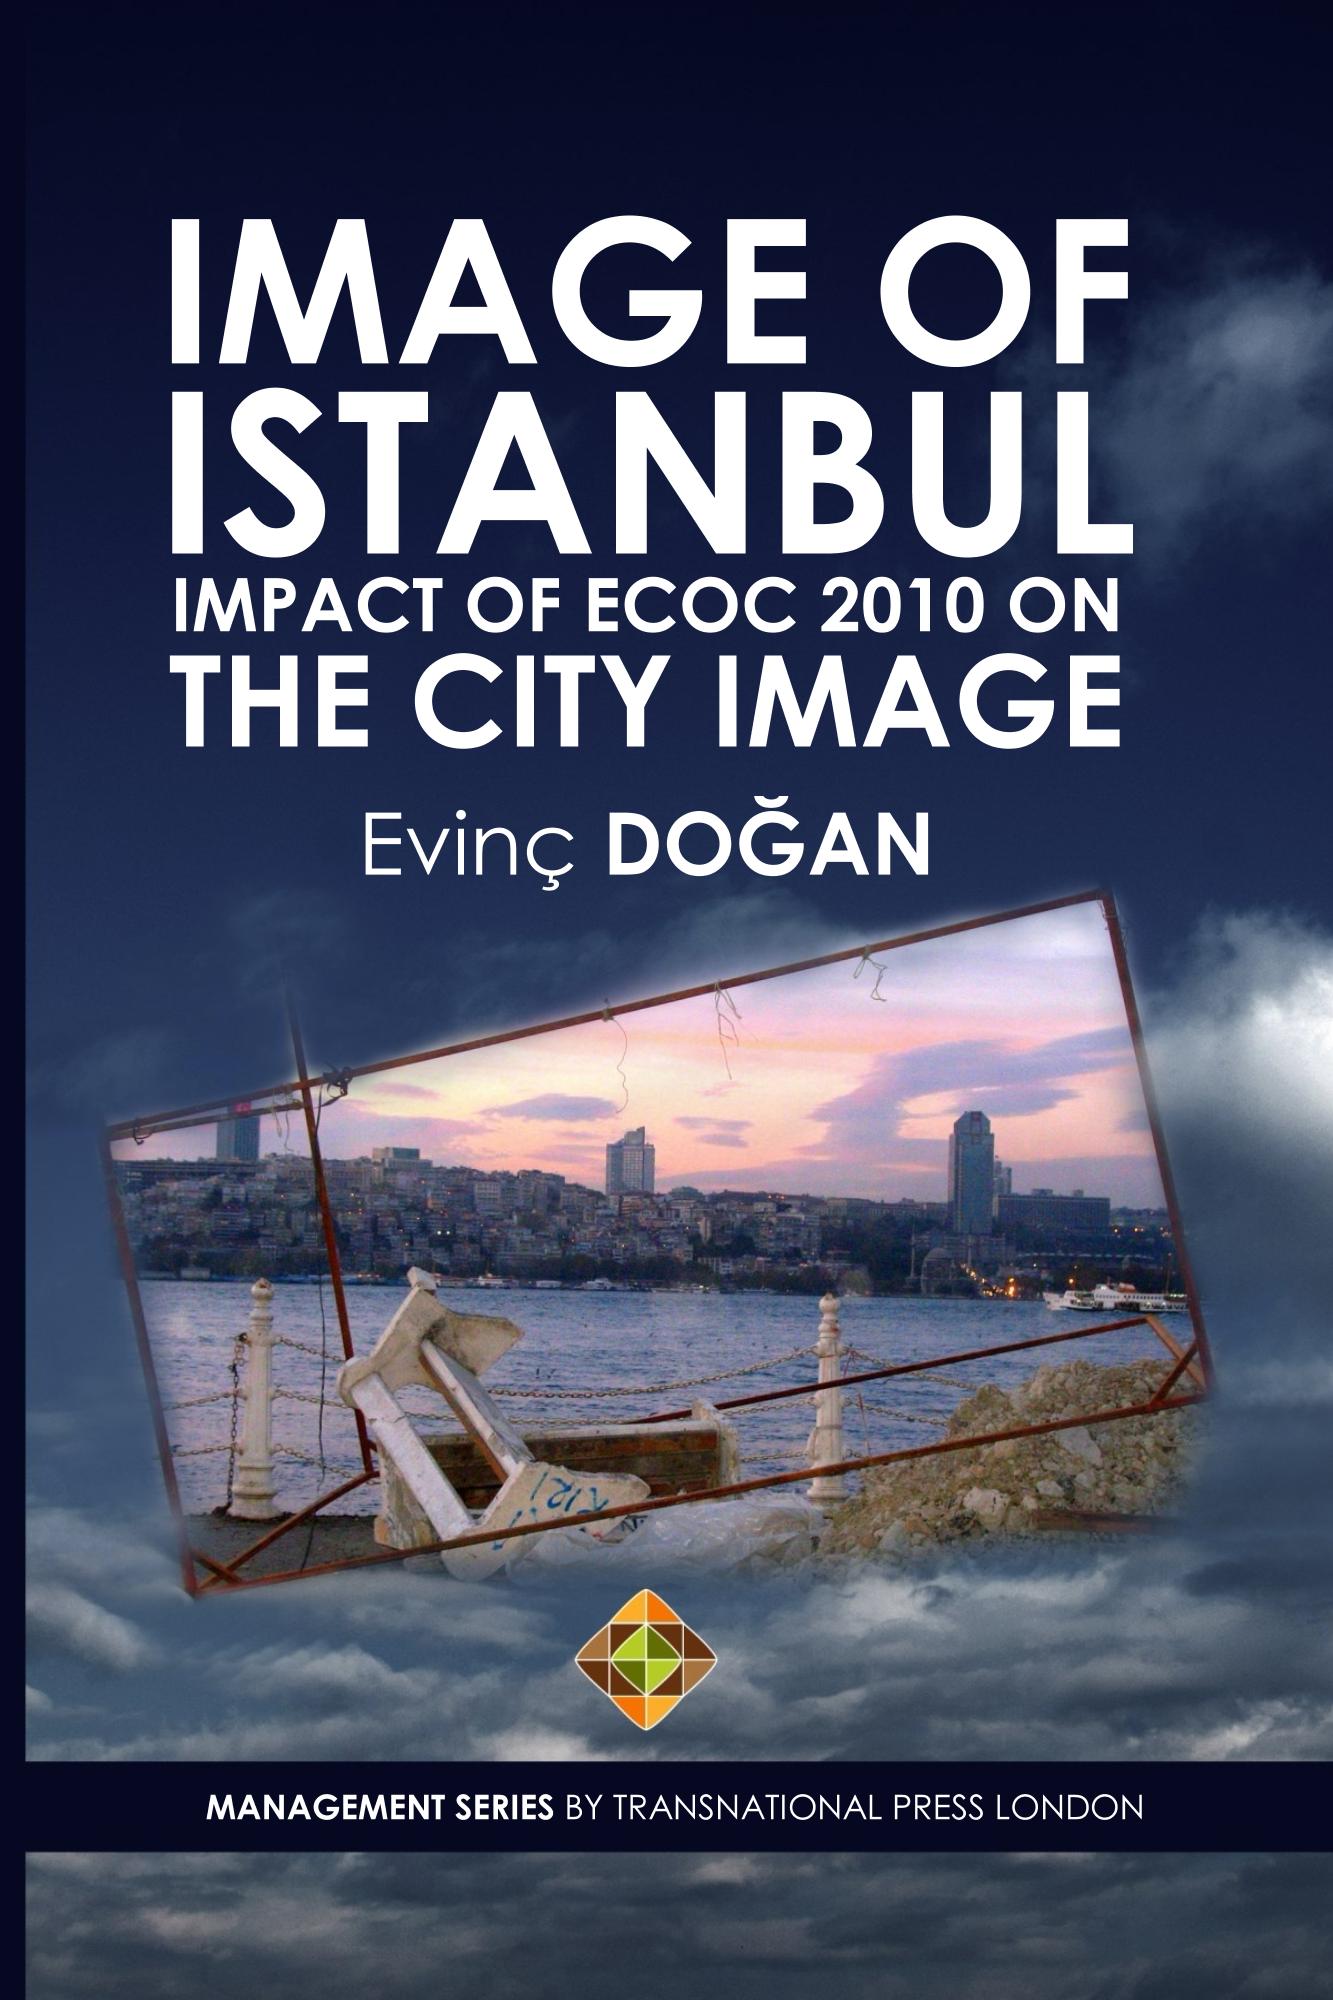 Image of Istanbul: Impact of ECoC 2010 on the City Image by Evinç DOĞAN